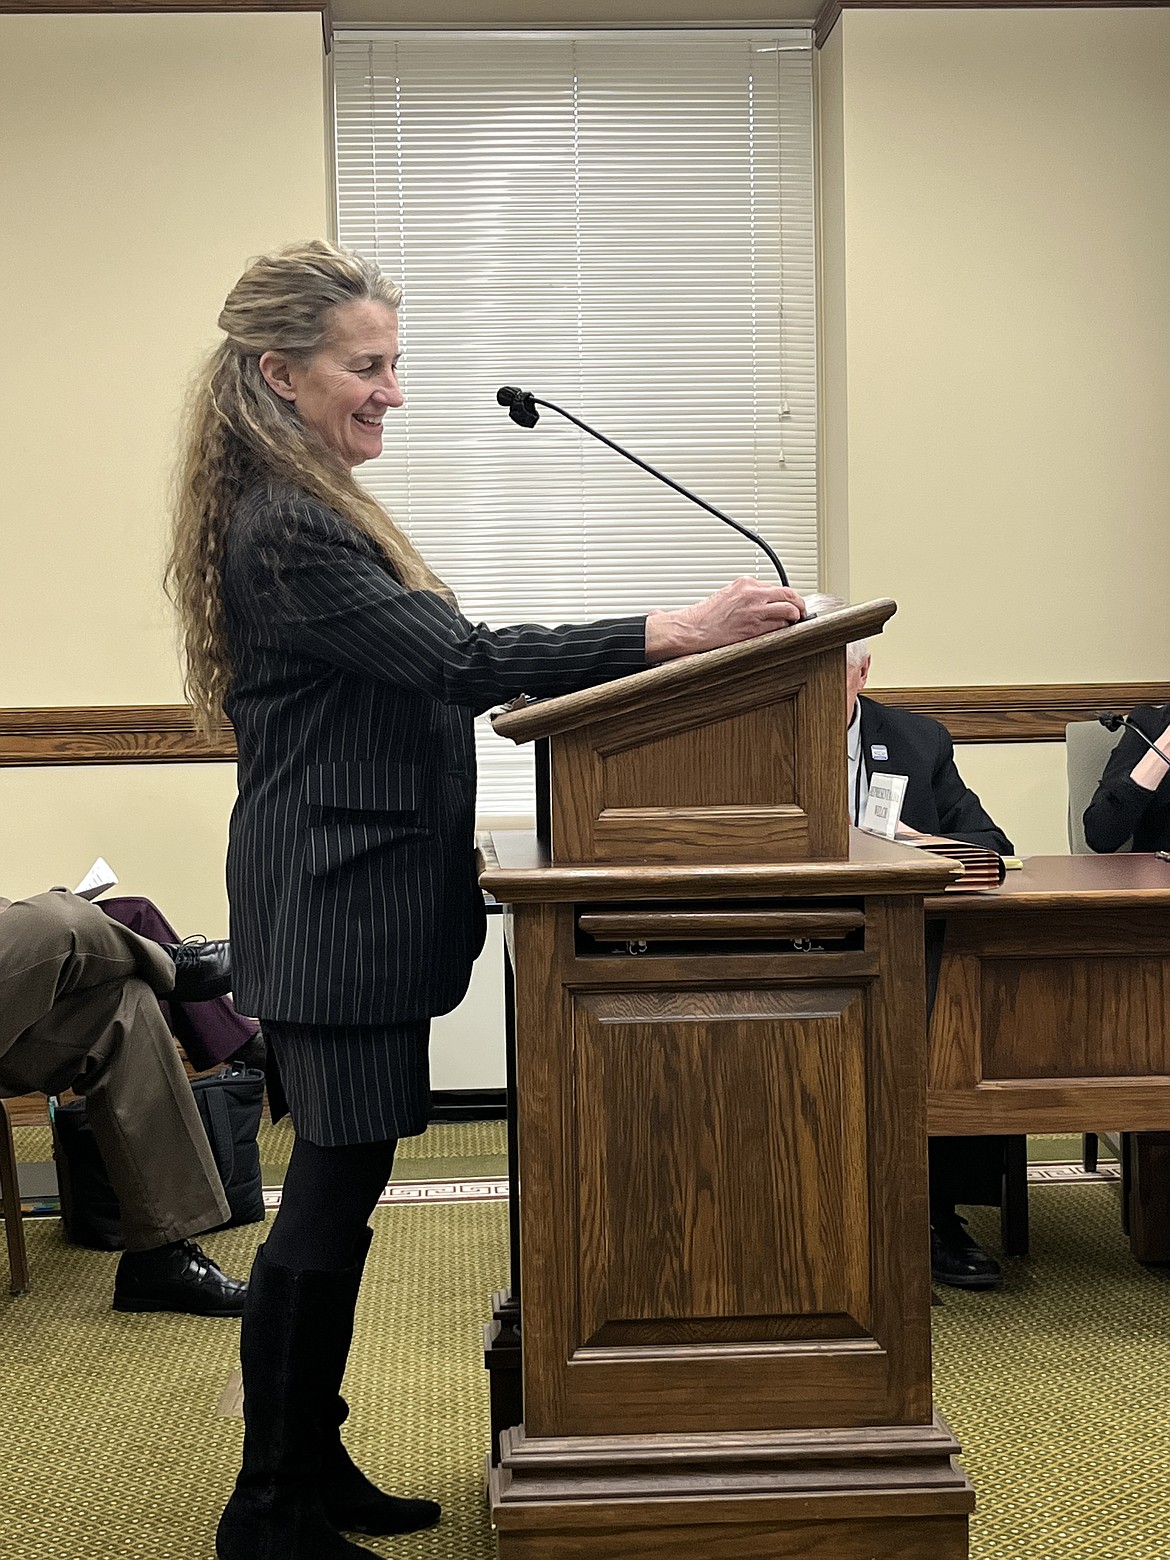 Democratic state Rep. Mary Caferro, who says Montana hasn’t distributed enough HEART fund money, suggested it could be used to increase Medicaid reimbursement rates to health care providers. (Keely Larson/KHN)